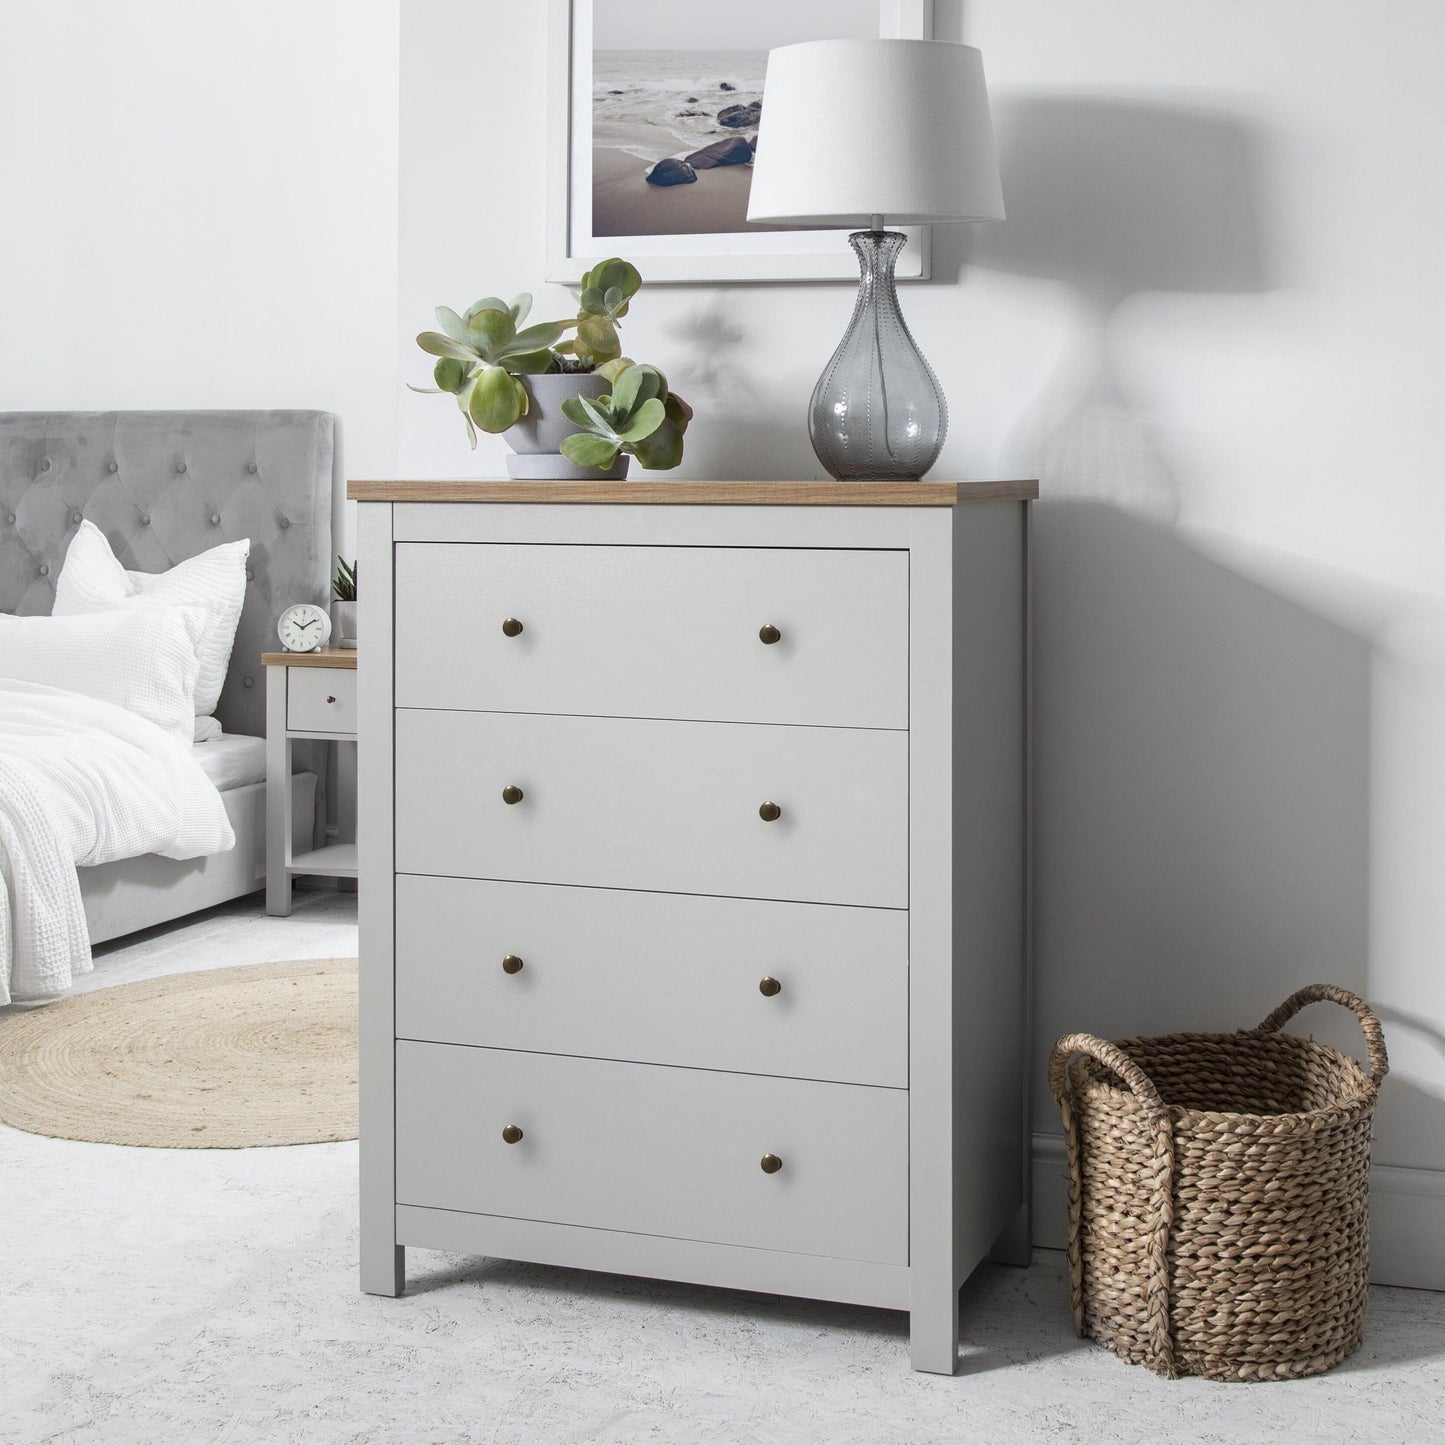 Bampton 3 Piece Bedroom Furniture Set with Chest of 4 Drawers - Laura James